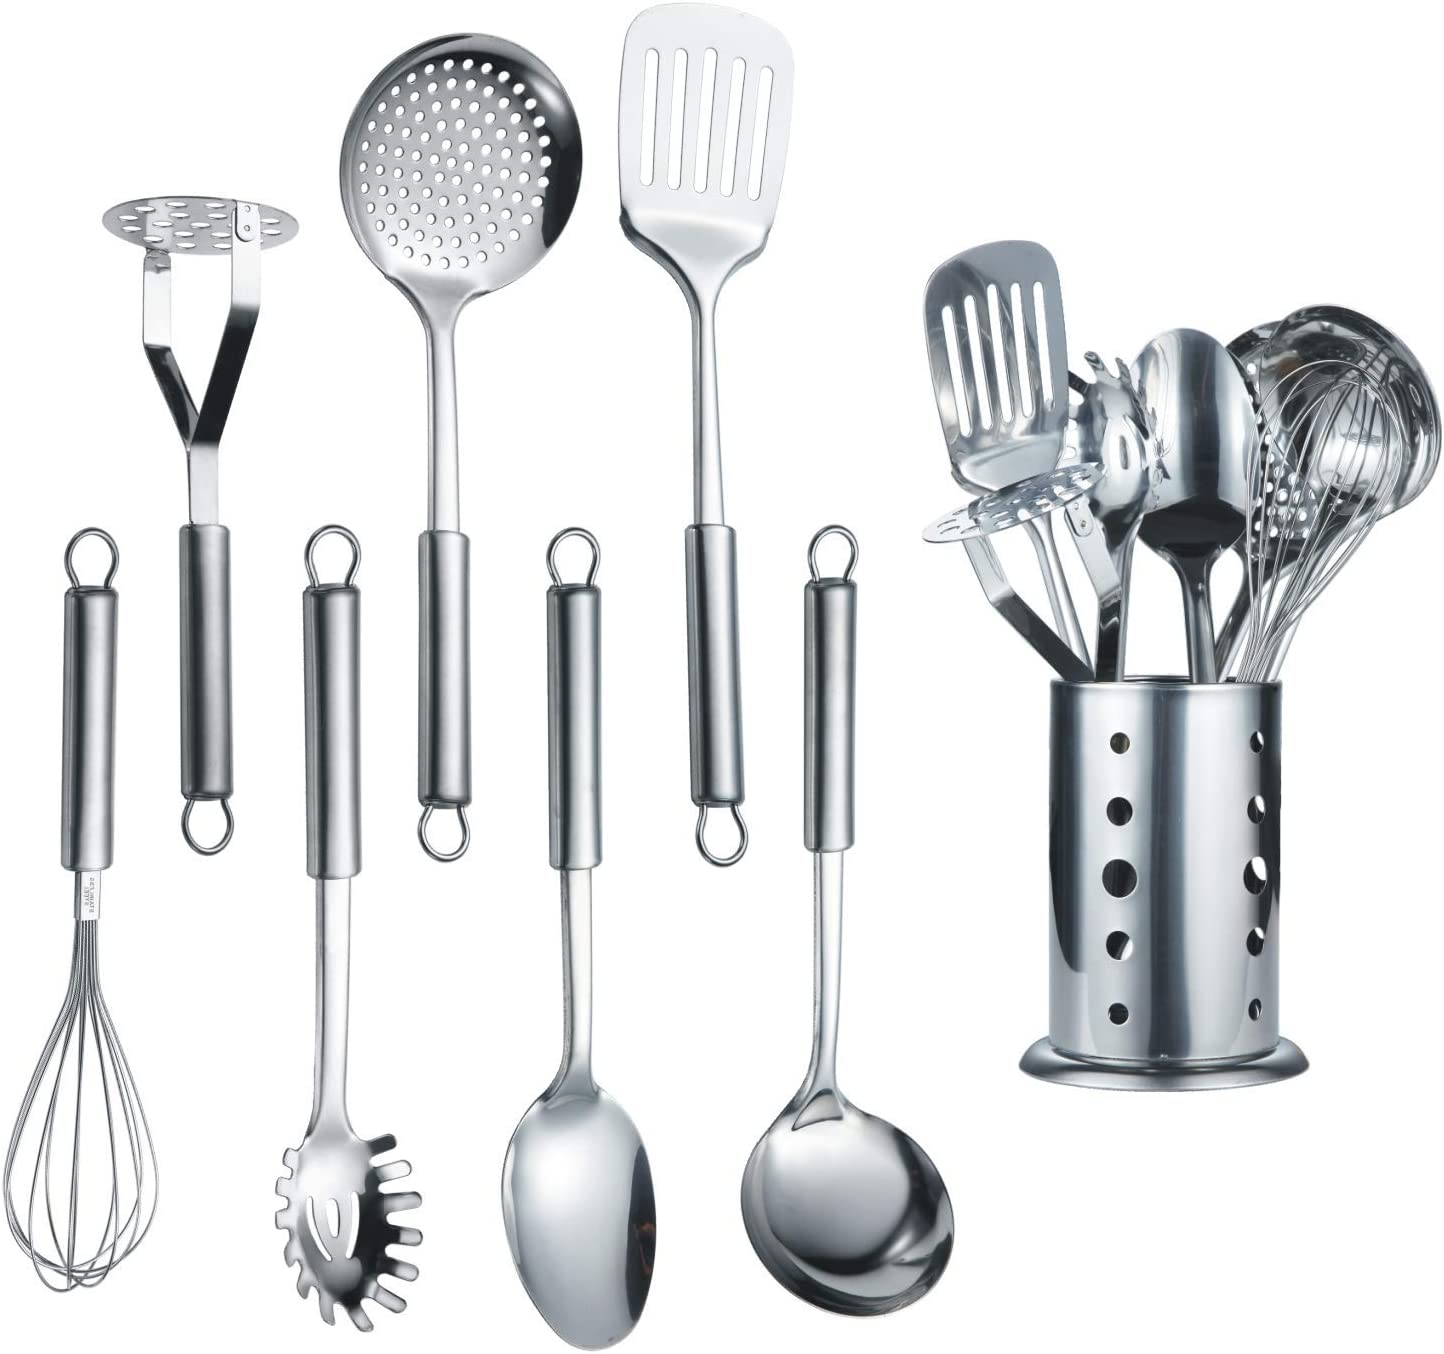 he best list of essential Indian cooking tools and equipment 